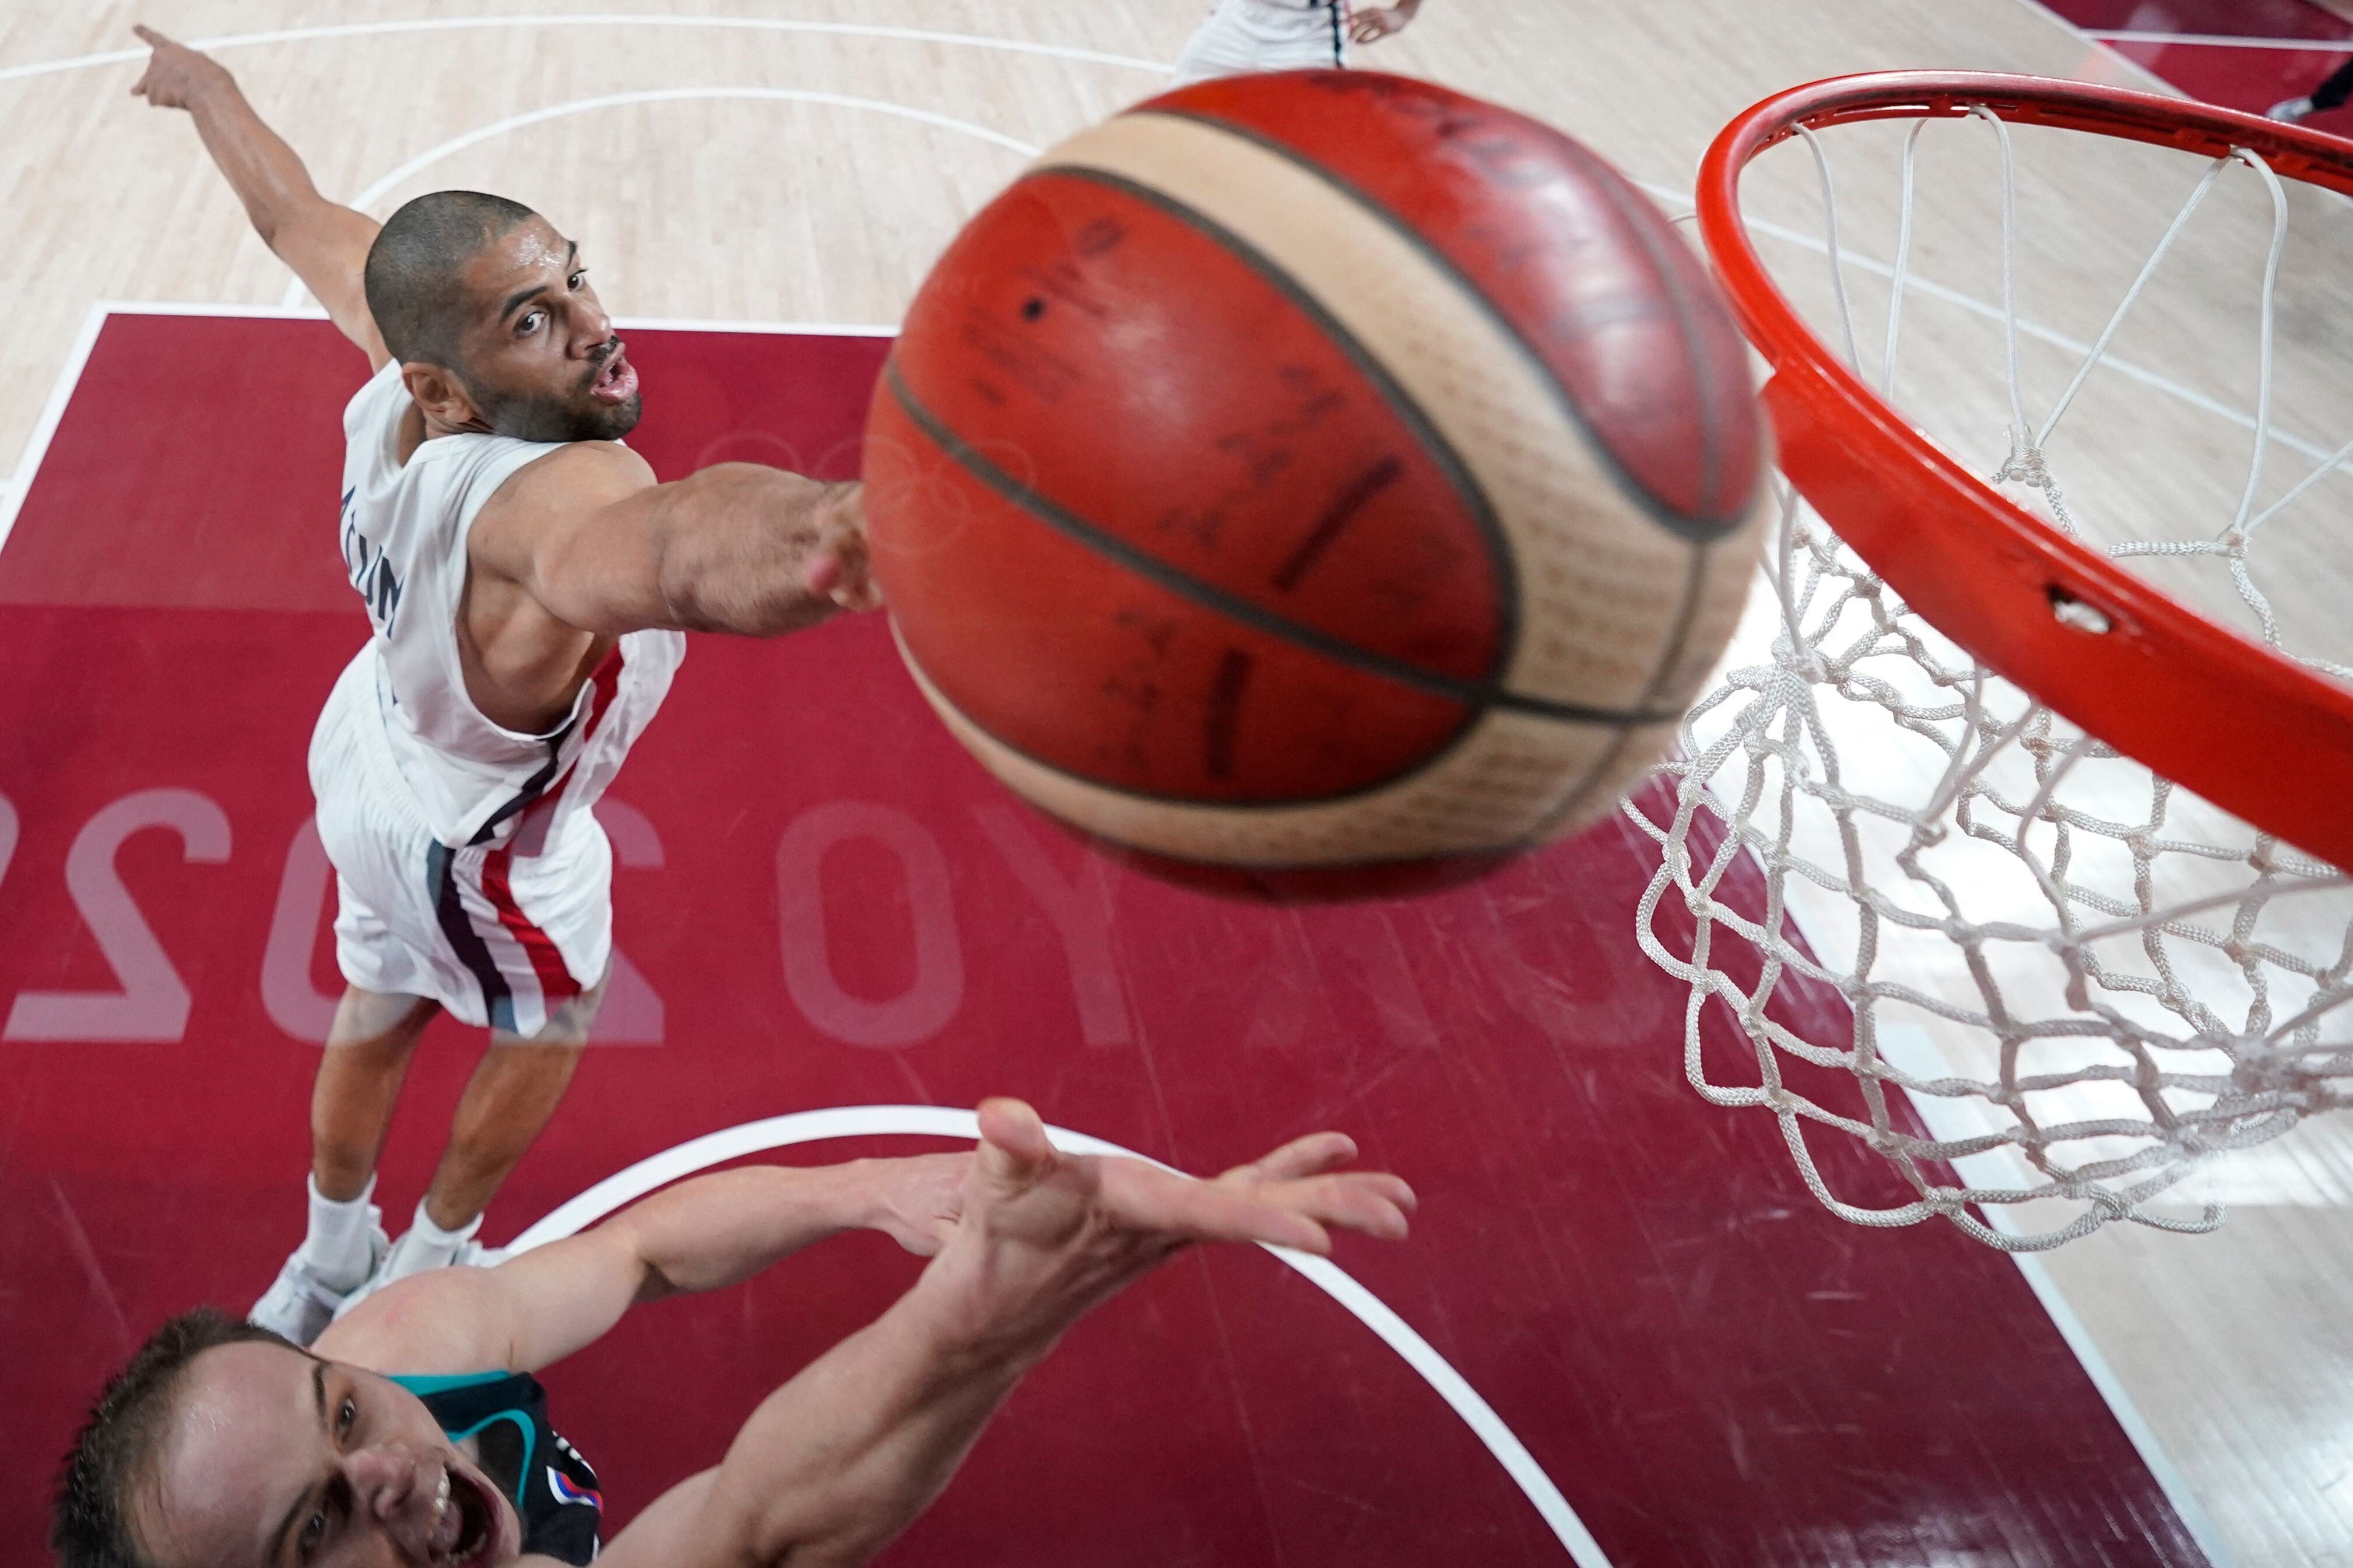 France's Nicolas Batum’s last-second block against Slovenia sets up a tantalising final between Les Bleus and the Americans for gold at Tokyo 2020. Photo: AFP